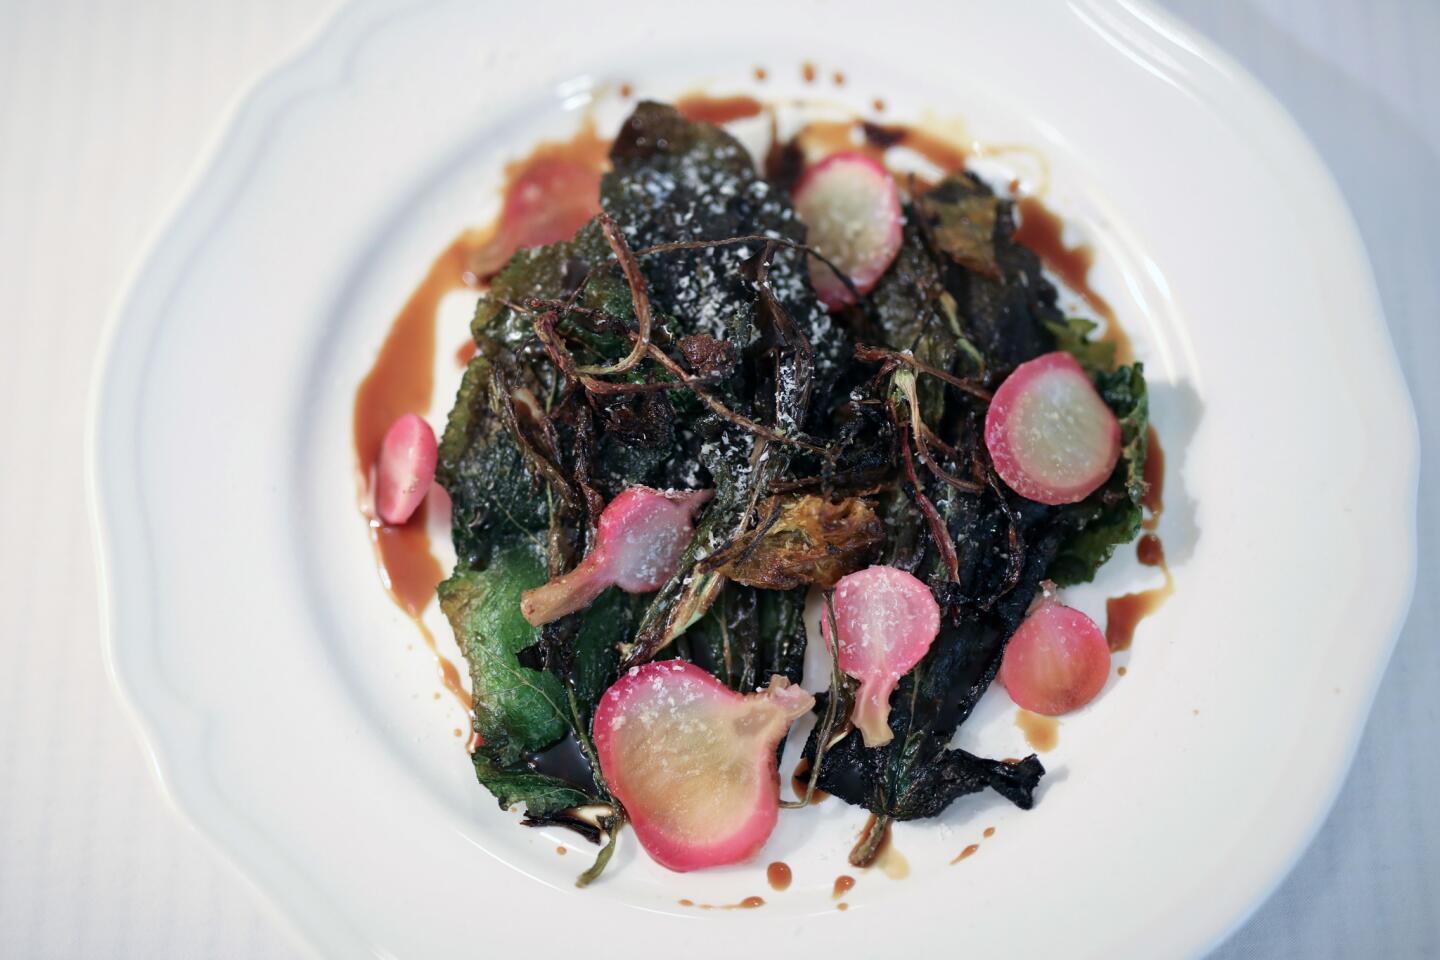 A dish consisting of "Winter herbs with pickled radish and turnip, laban jameed and dibes" in the kitchen of Fawda restaurant, in Bethlehem, West Bank.